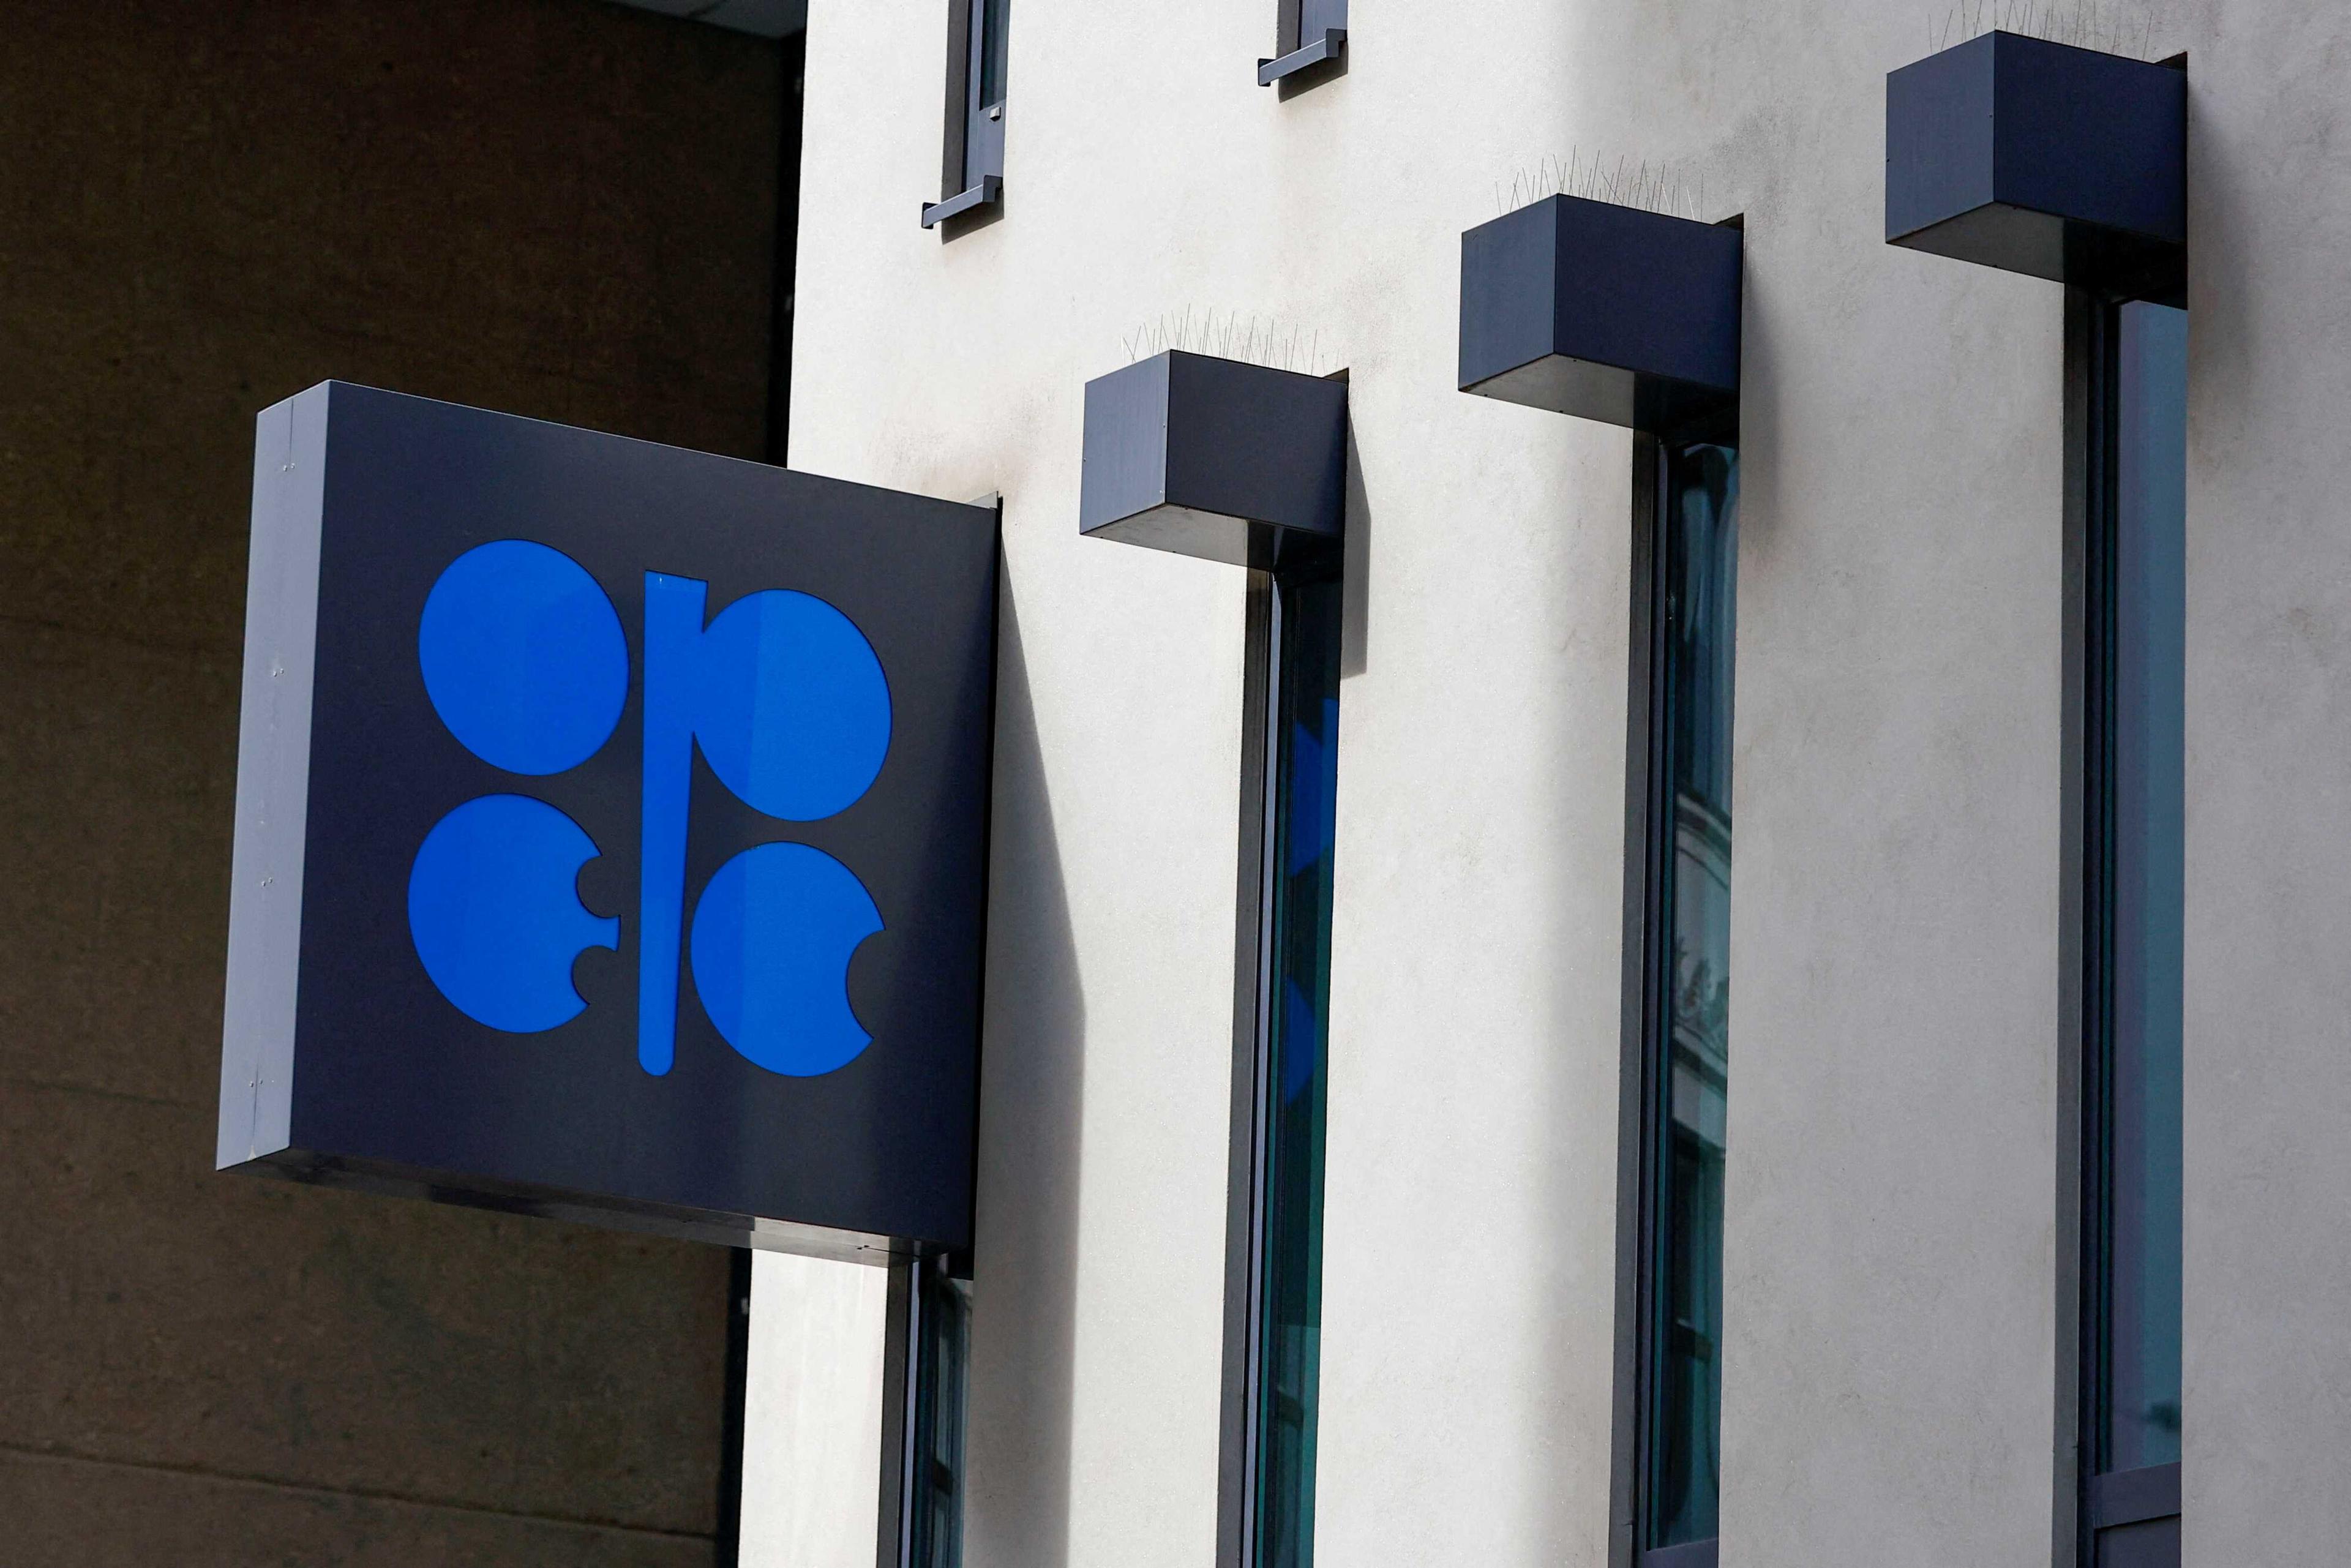 An Opec sign is seen on the day of Opec+ meeting in Vienna in Vienna, Austria Oct 5. Photo: Reuters